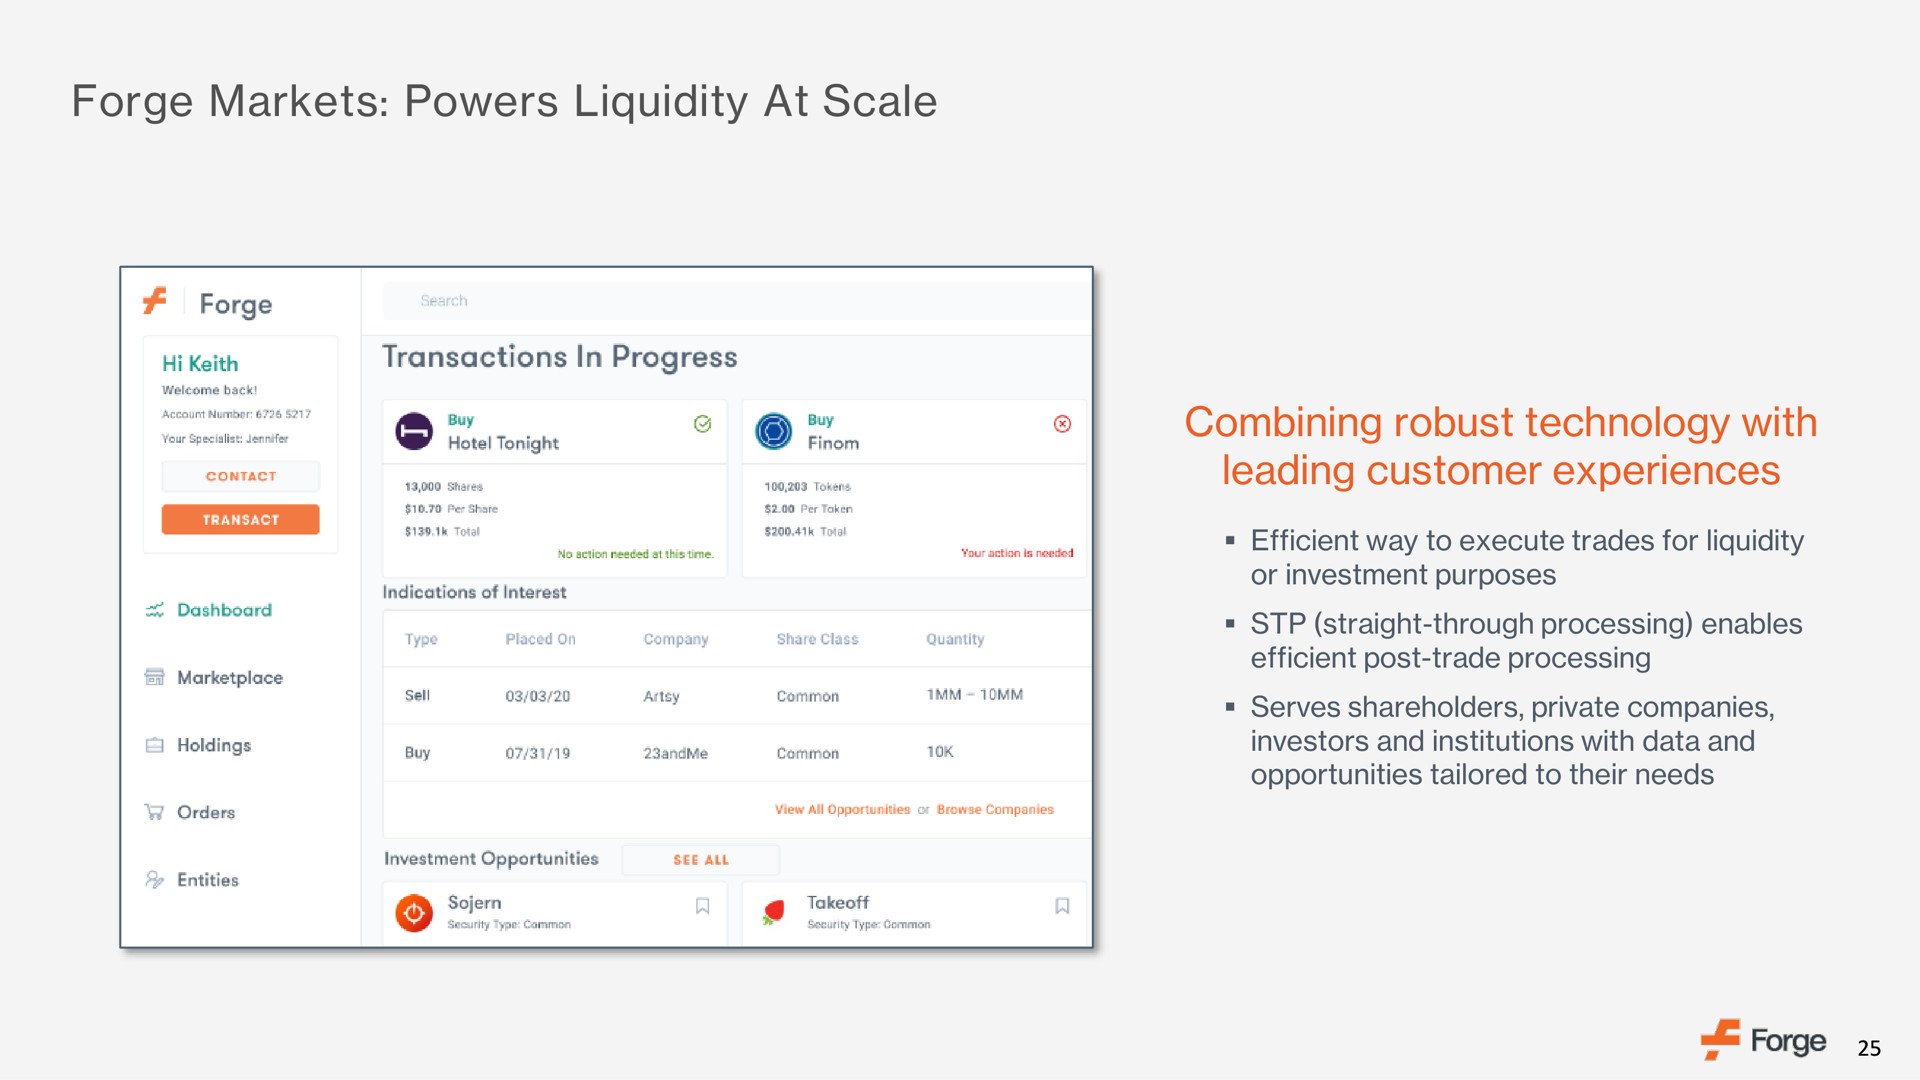 forge markets powers liquidity at scale combining robust technology with leading customer experiences | Forge